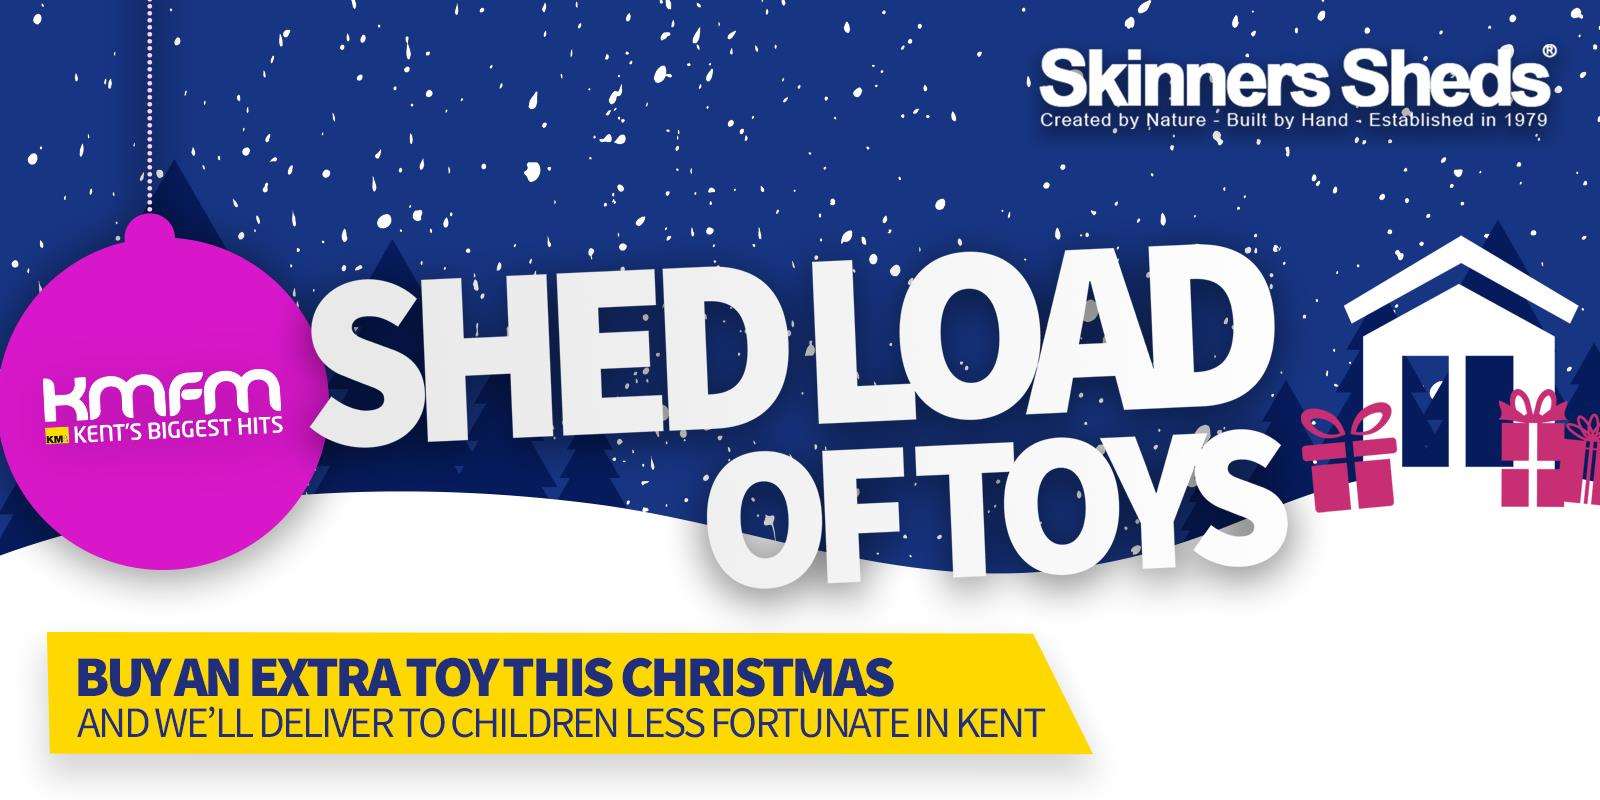 kmfm Shed Load of Toys appeal was launched in November